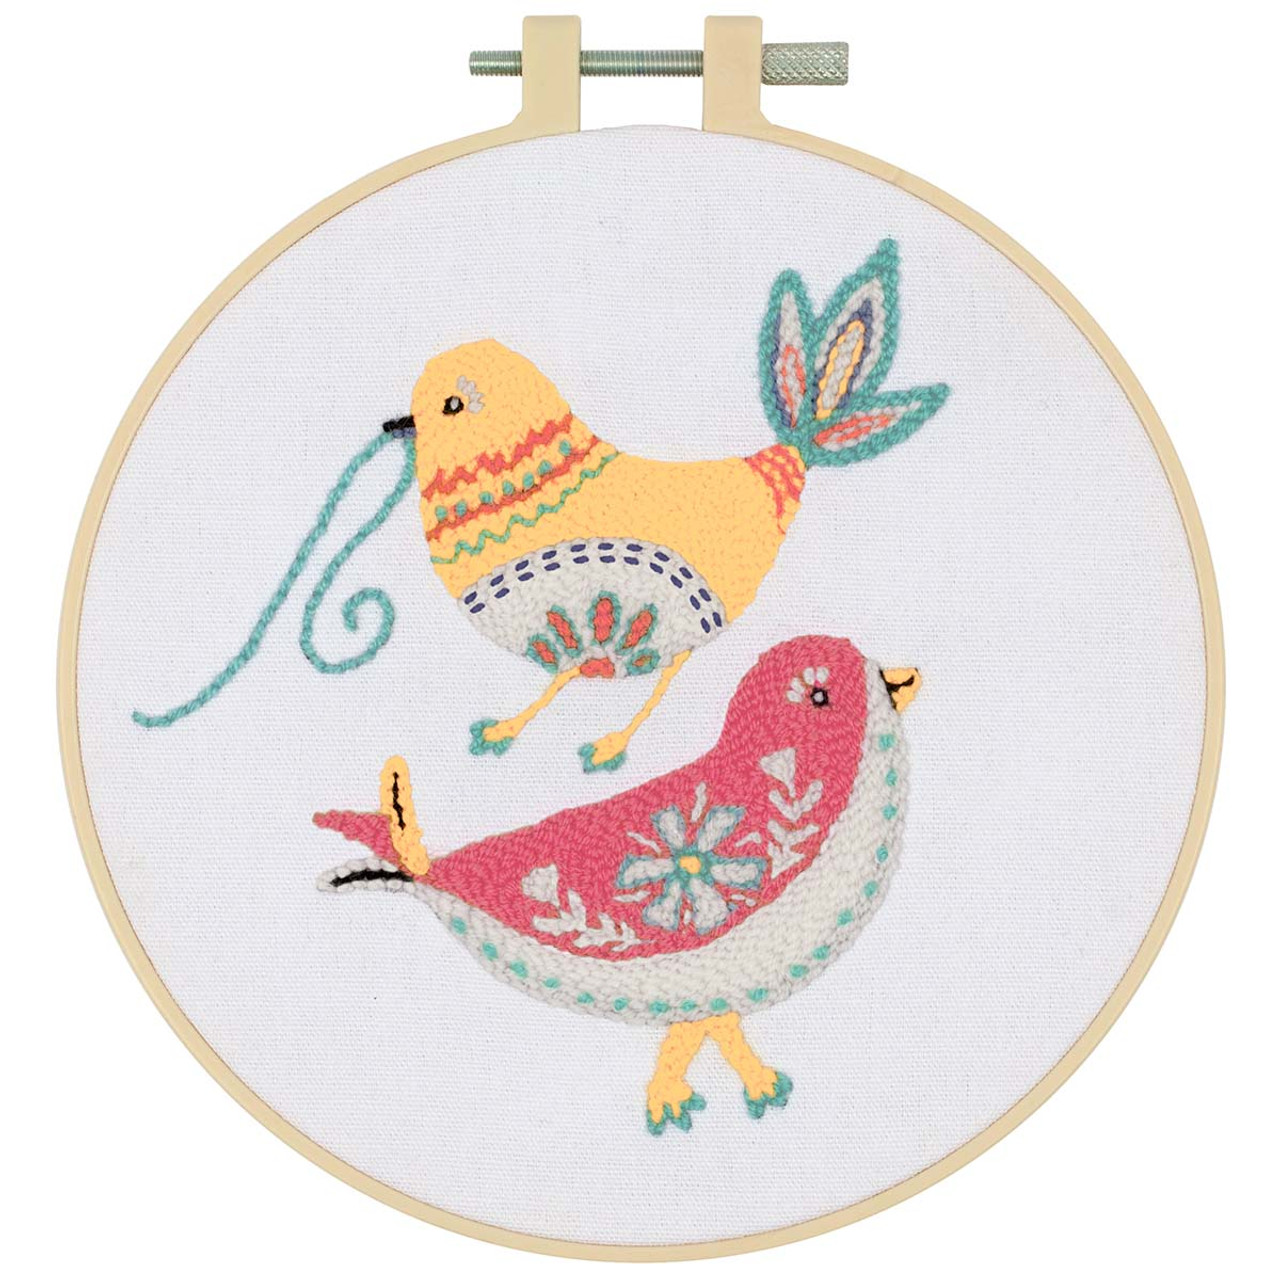 6 Punch Needle Embroidery Patterns: Creating Fun Textures with